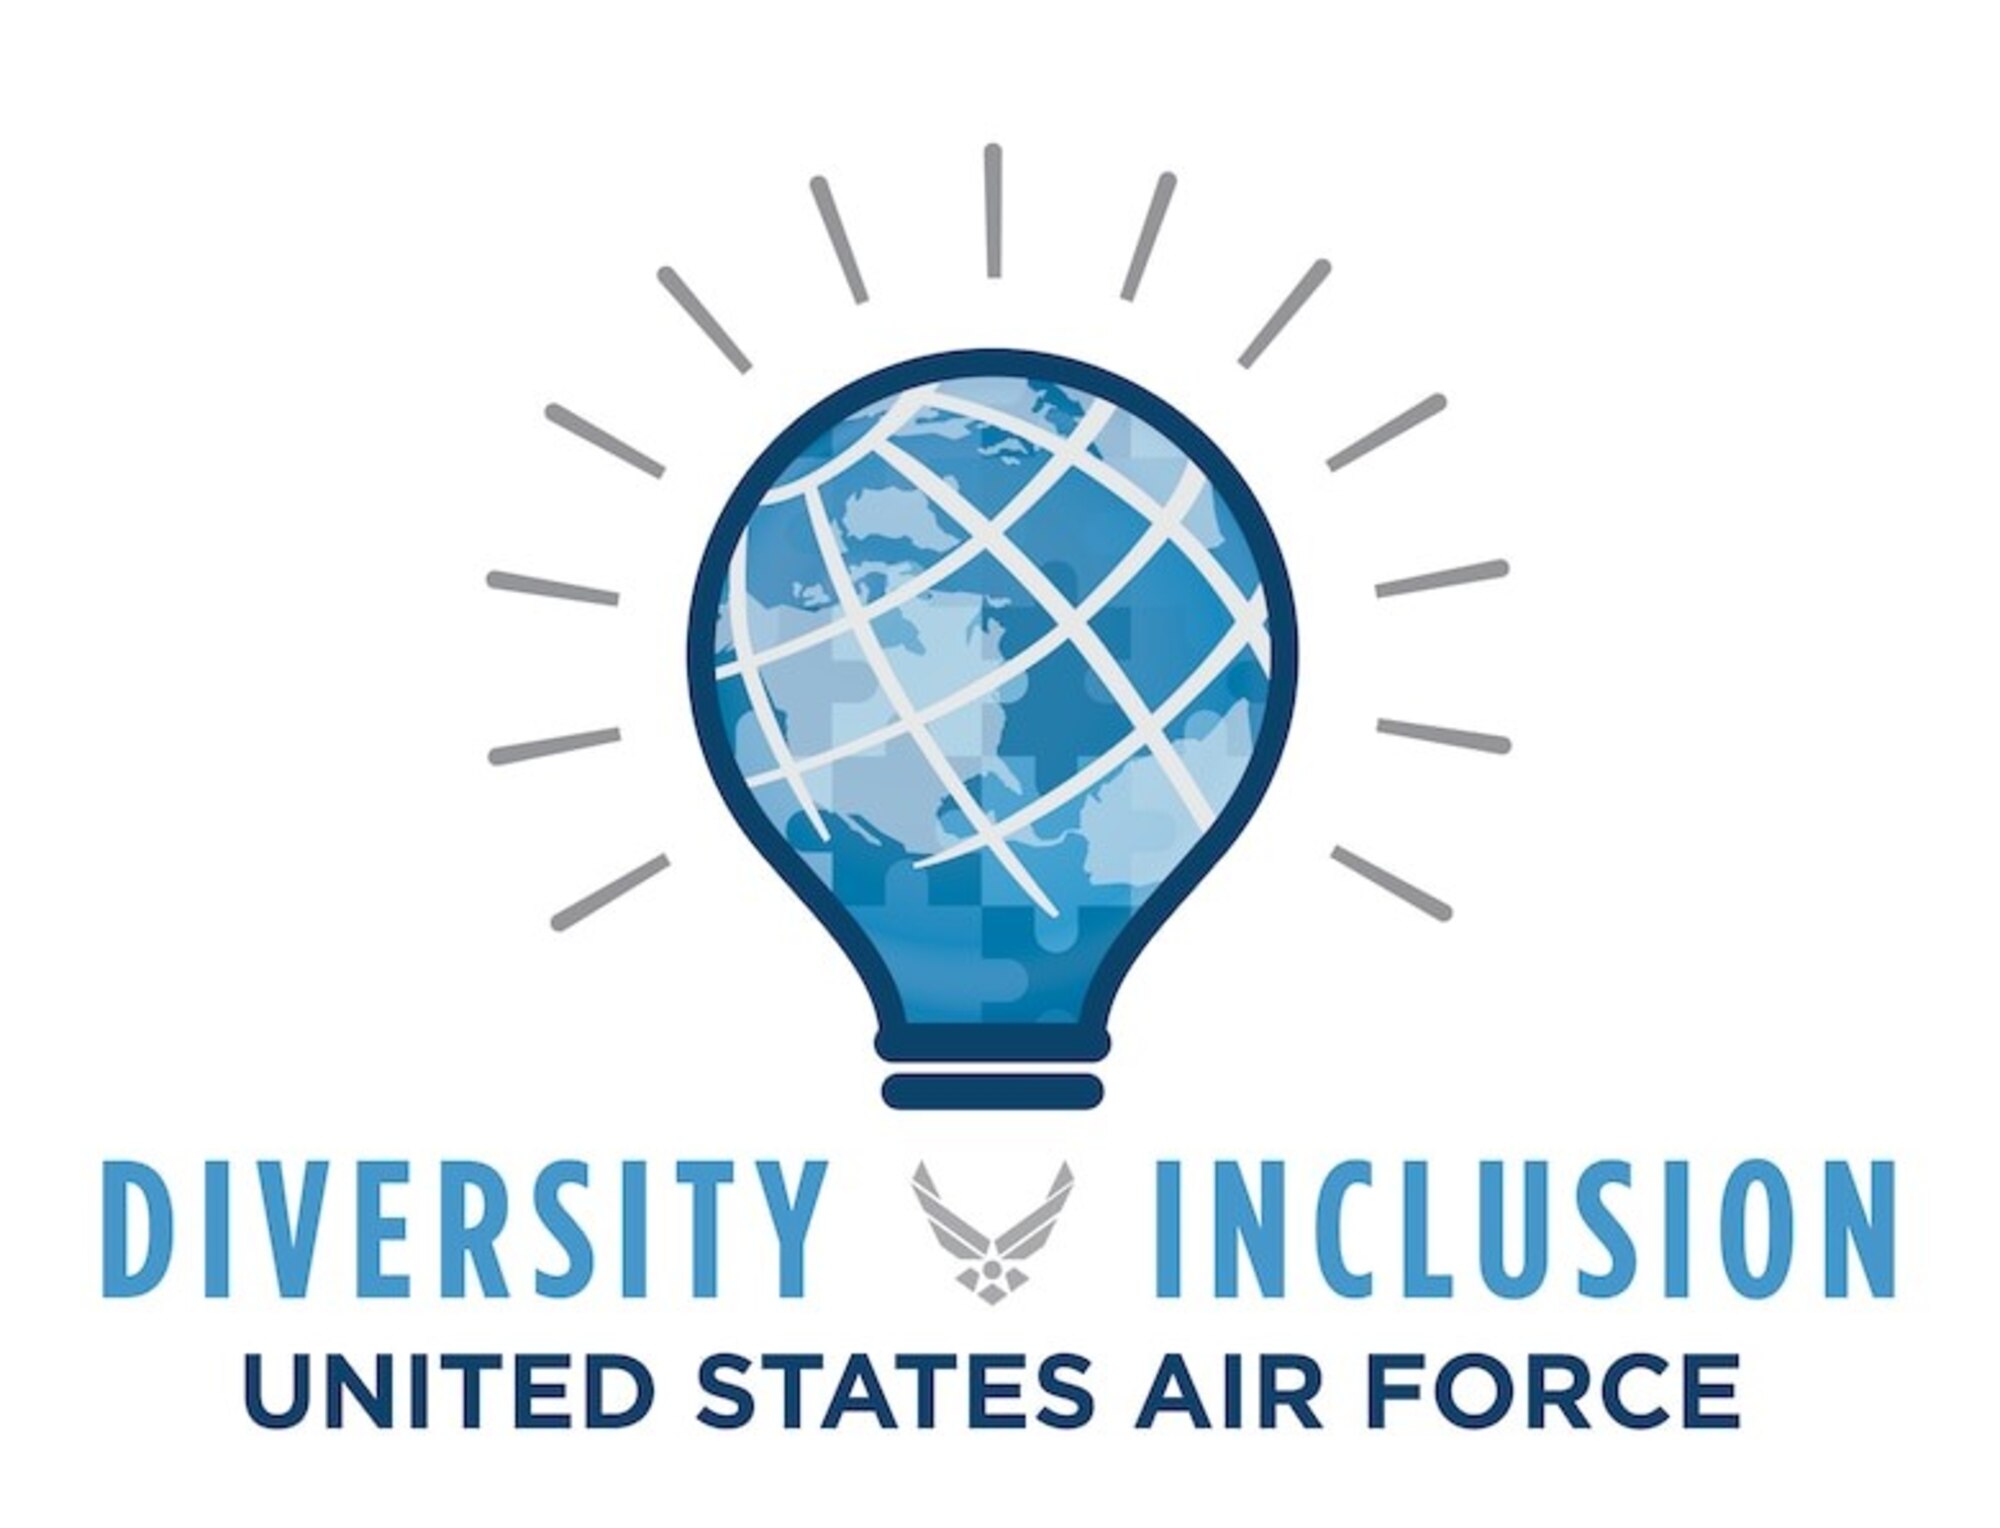 The Air Force Research Laboratory Aerospace Systems Directorate hosted the Diversity Speaker Series throughout 2021 to provide employees with unique perspectives and learning opportunities through virtual events. This series enhances internal collaboration and provides AFRL employees with the opportunity to learn from leaders with diverse backgrounds and experiences. (Courtesy graphic)